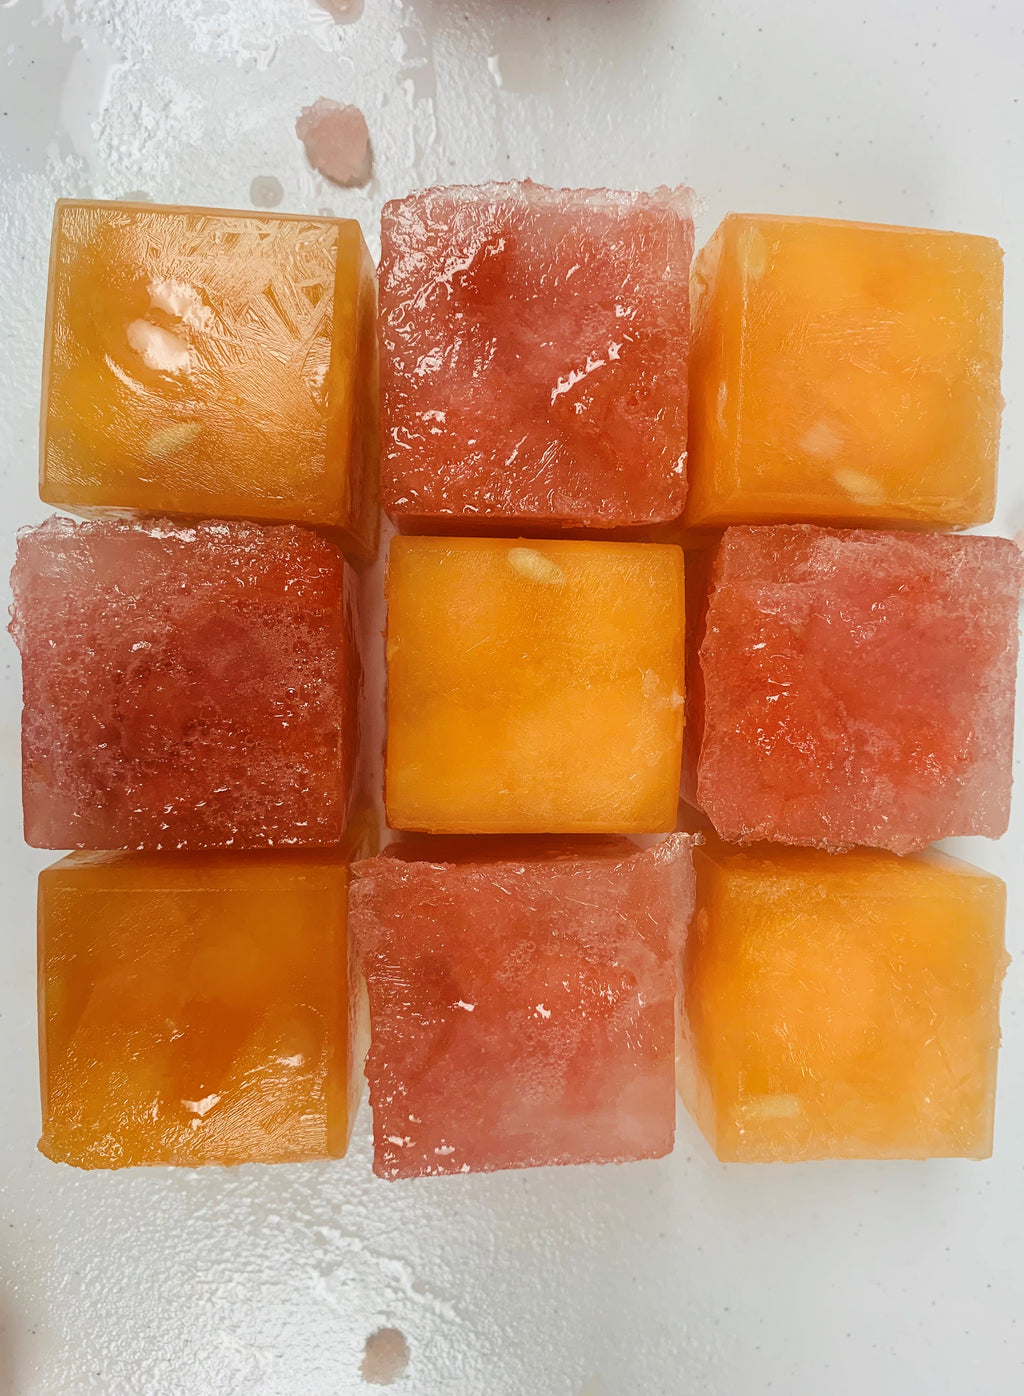 What-A-Melon Cubes or Spears